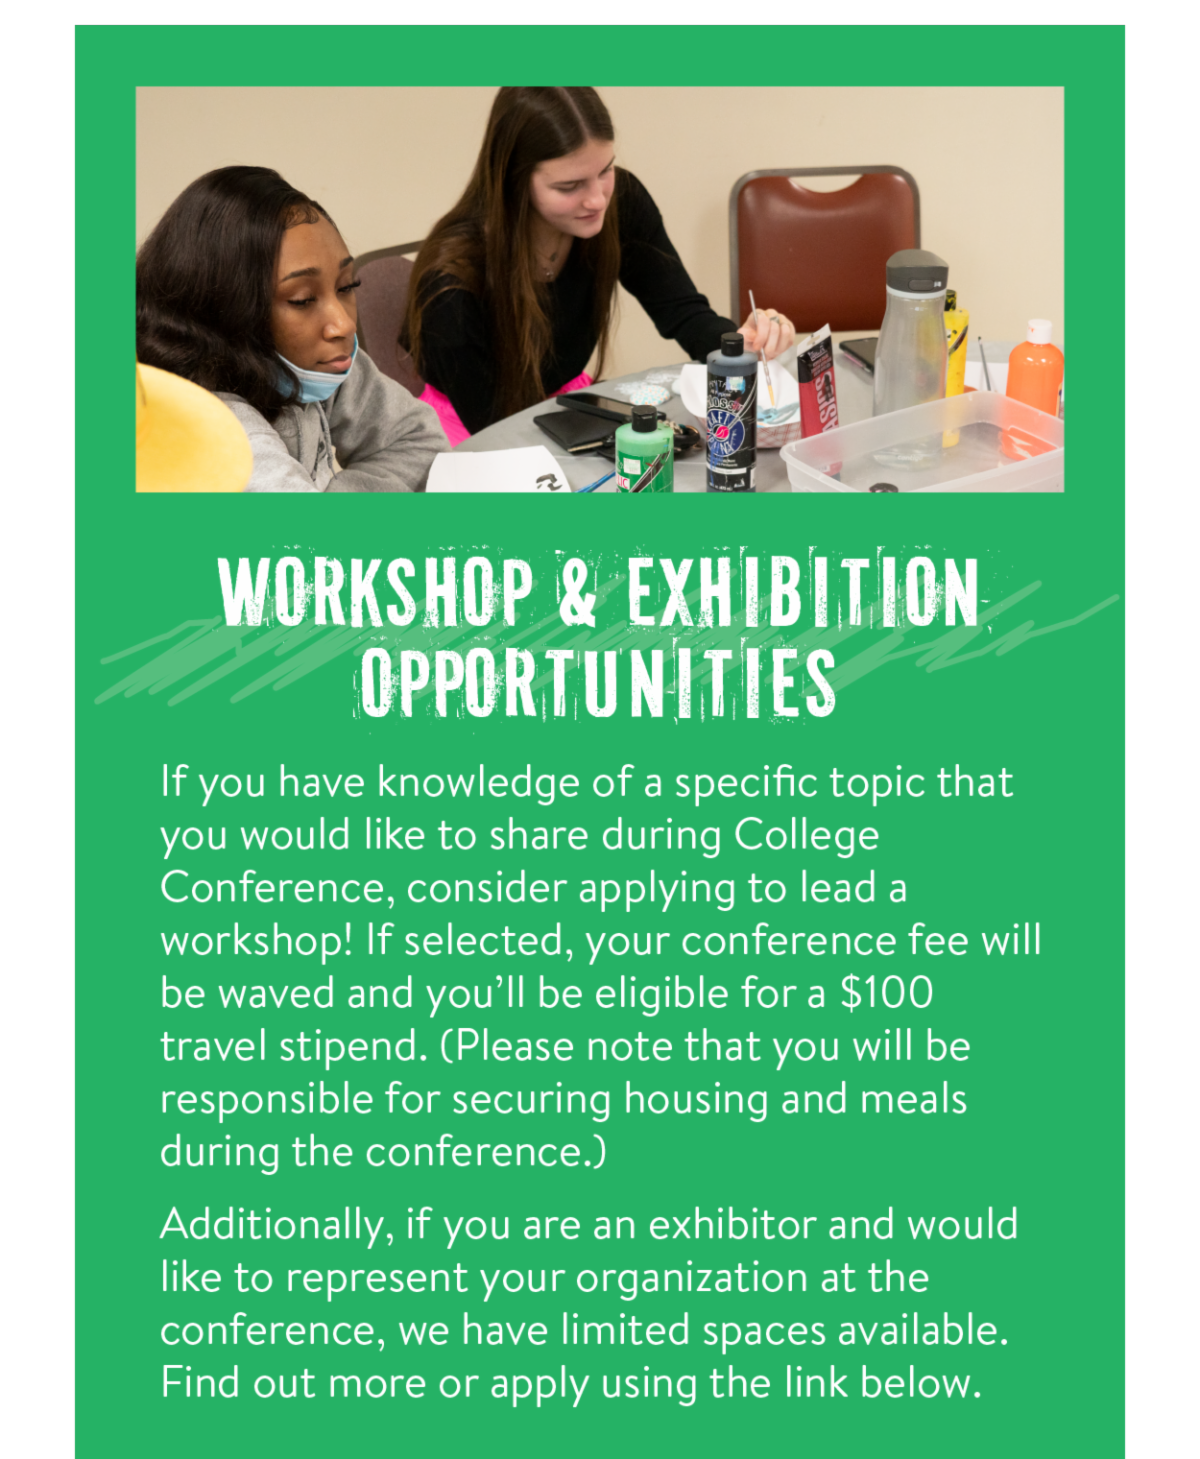 Workshop & Exhibition Opportunities - If you have knowledge of a specific topic that you would like to share during College Conference, consider applying to lead a workshop! If selected, your conference fee will be waved and you’ll be eligible for a $100 travel stipend. (Please note that you will be responsible for securing housing and meals during the conference.) Additionally, if you are an exhibitor and would like to represent your organization at the conference, we have limited spaces available. Find out more or apply using the link below.